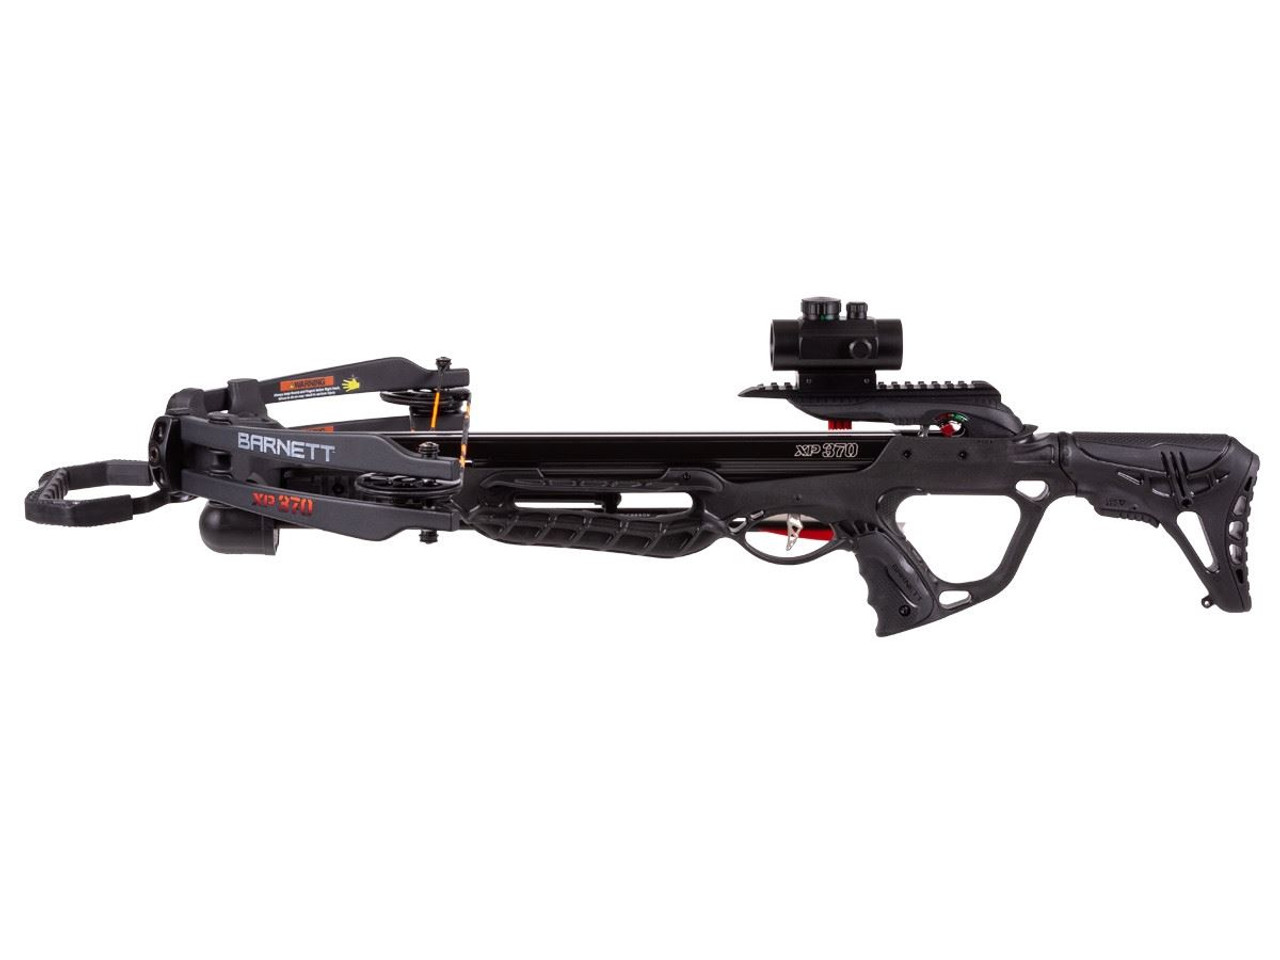 Barnett Explorer XP370 Compound Crossbow with red dot sight arrows and quiver